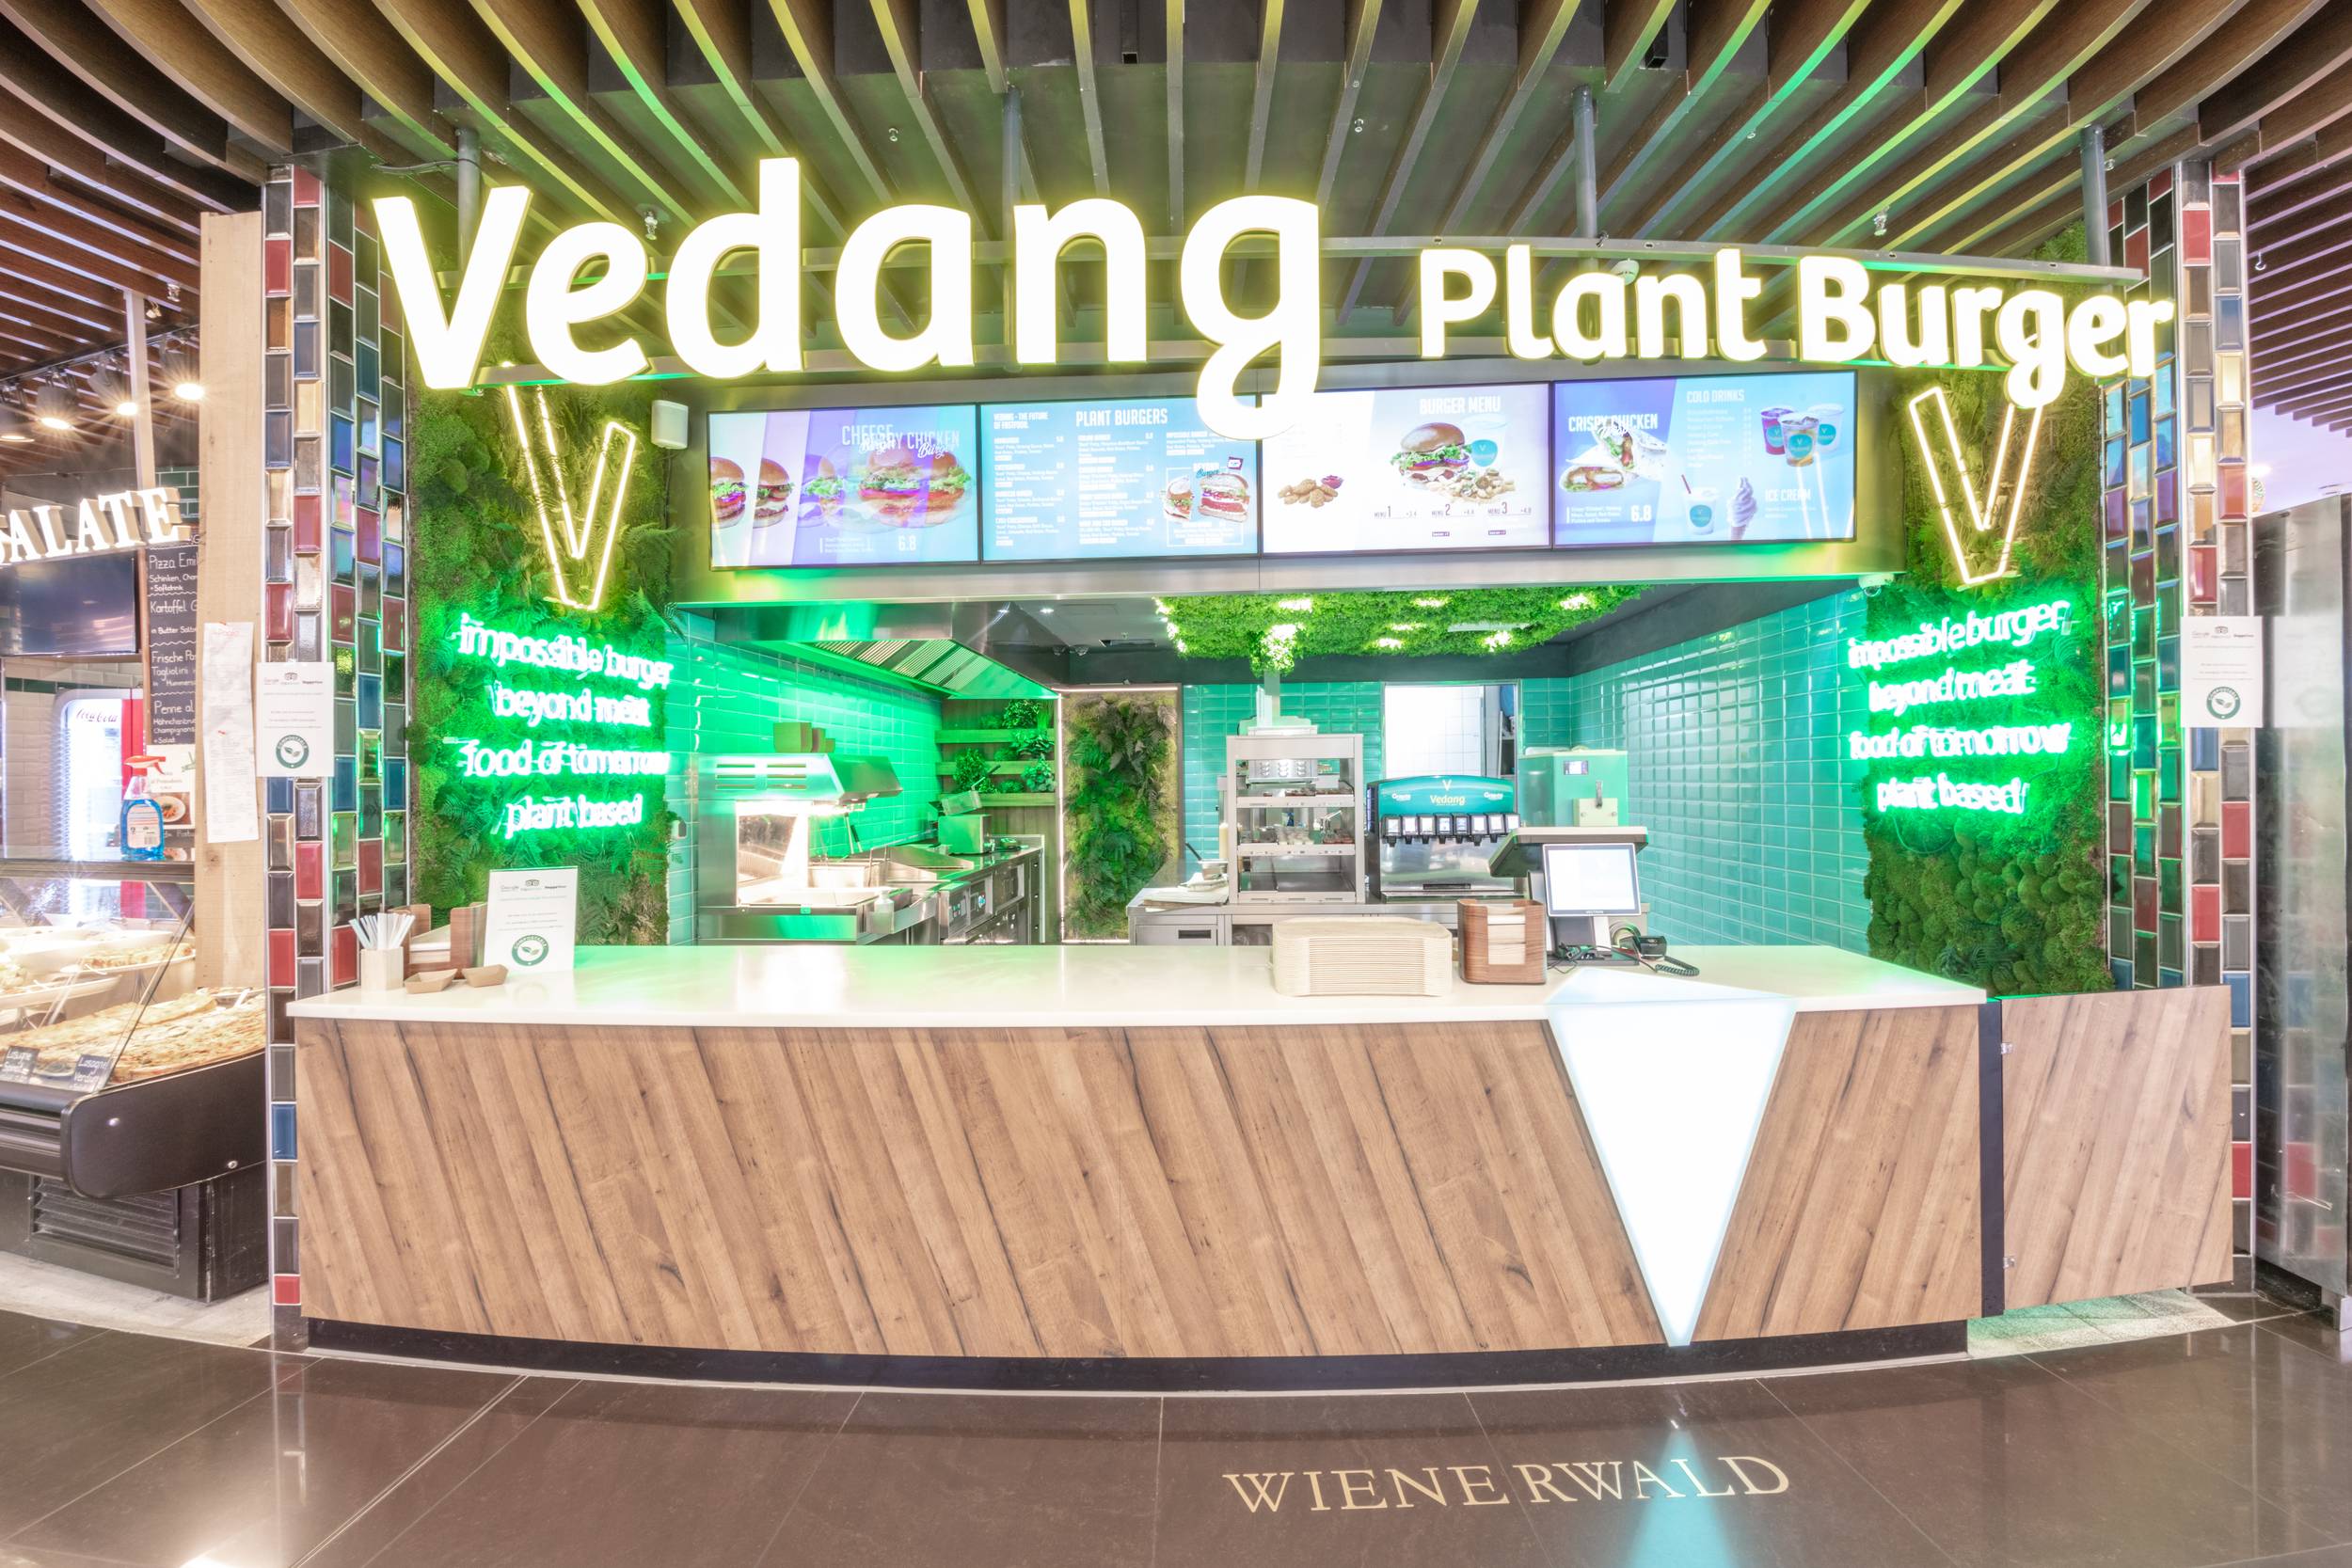 Vedang at the Mall of Berlin